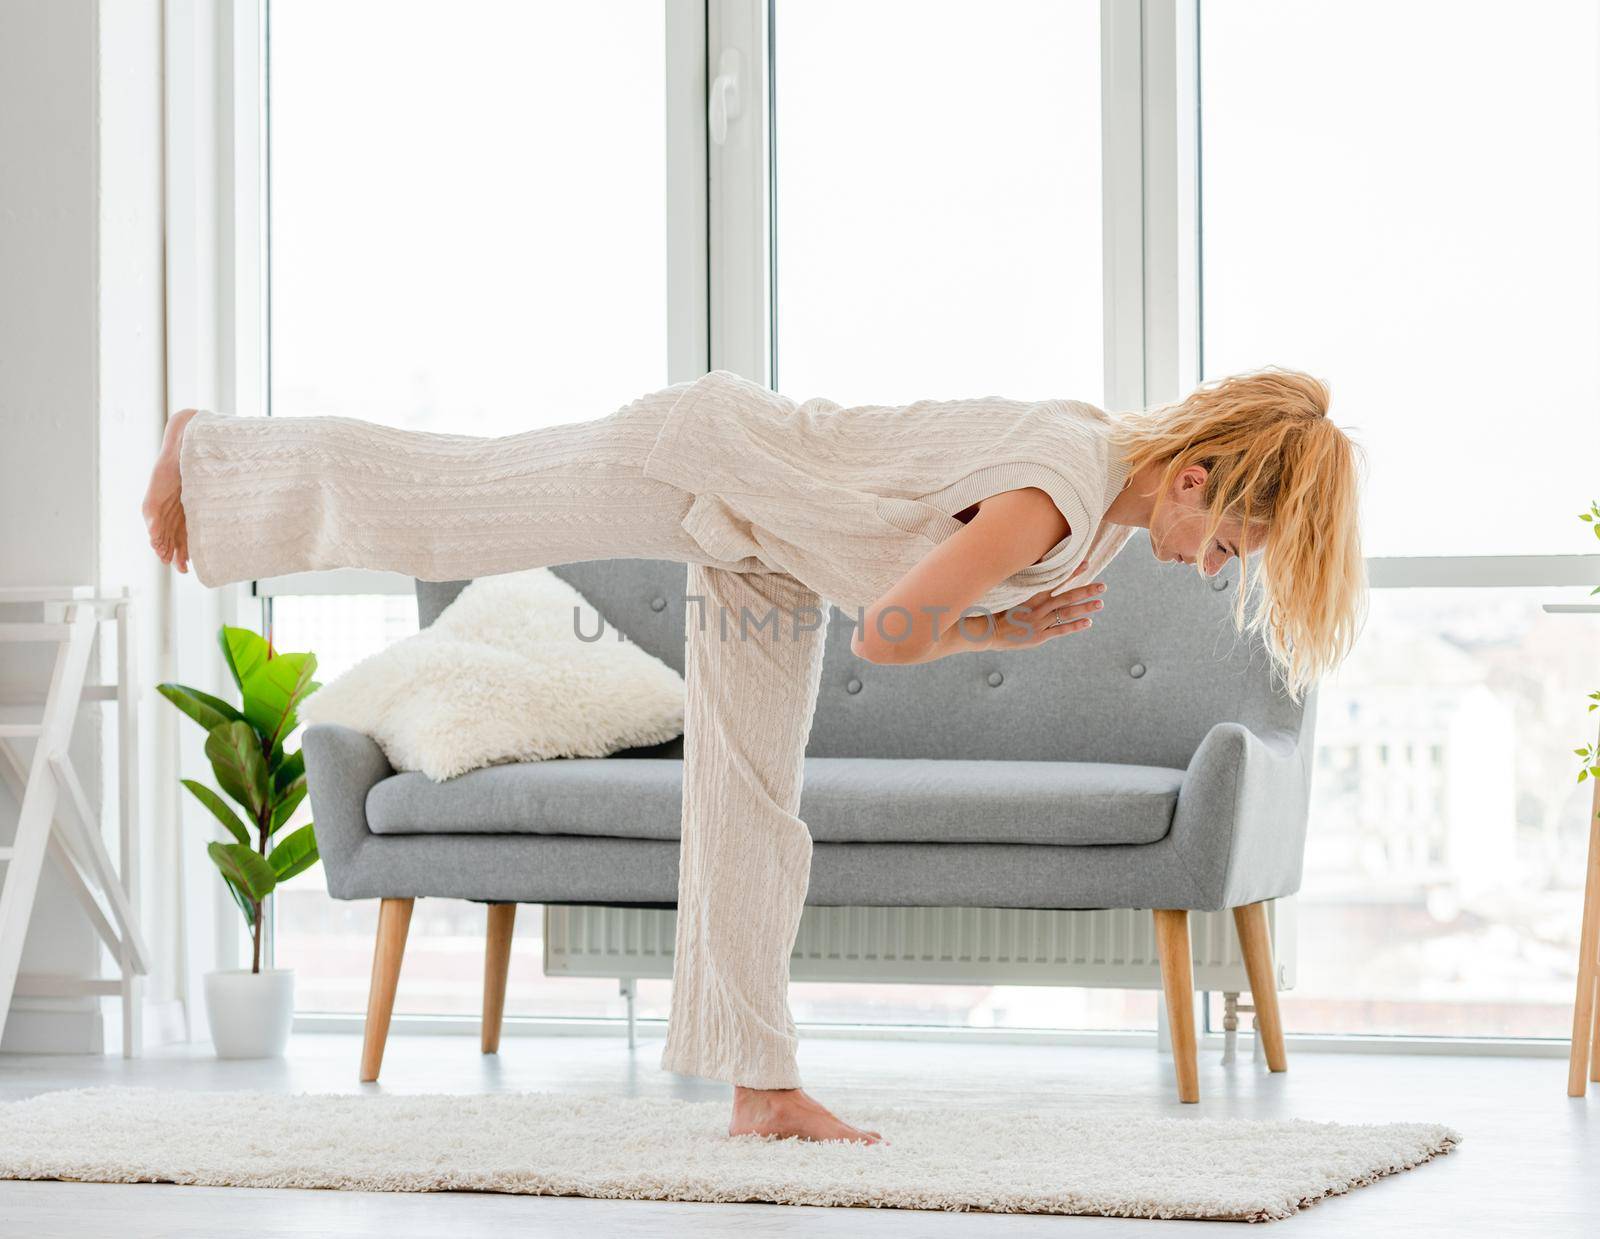 Blond girl keeps balance standing on one leg during morning yoga workout at home